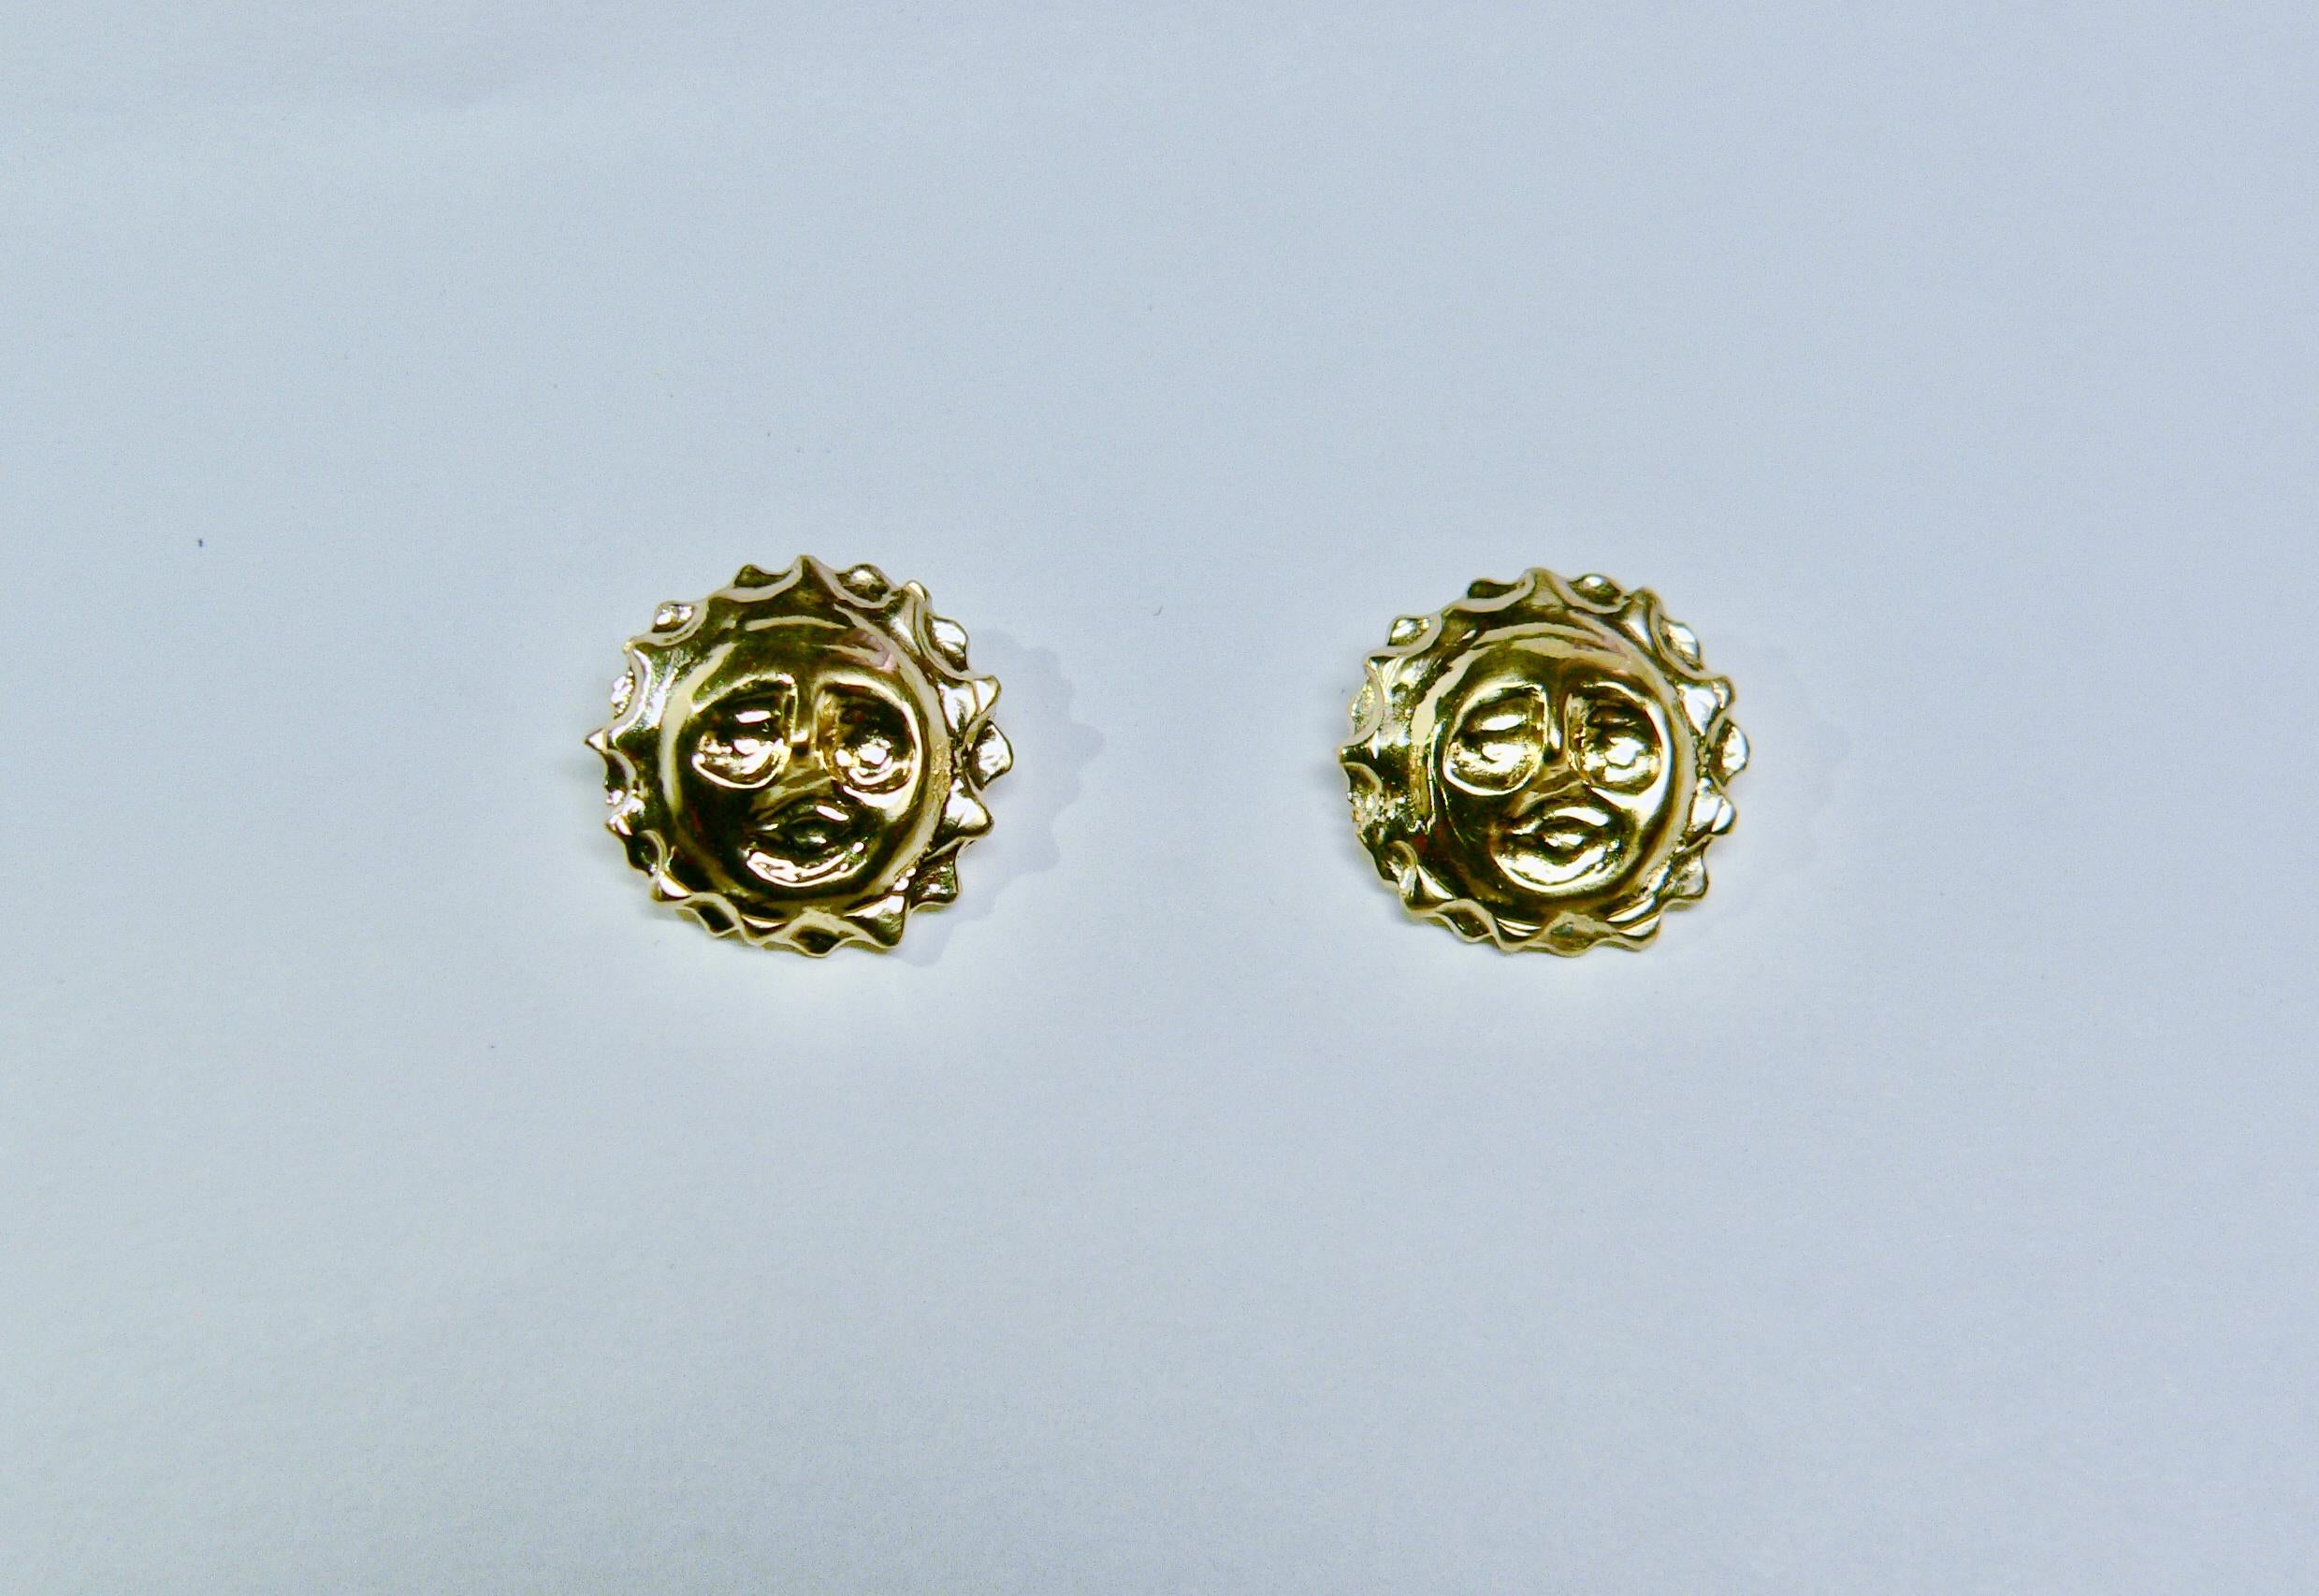 Sun earring from Sun and Moon Collection is made of Sterling Silver with 18 Karat gold plated. It is a motif of Sun shining and smiling to us all.

The size is about 12mm length, 13mm width, 15mm depth (included post length) and 2 grams by each item.